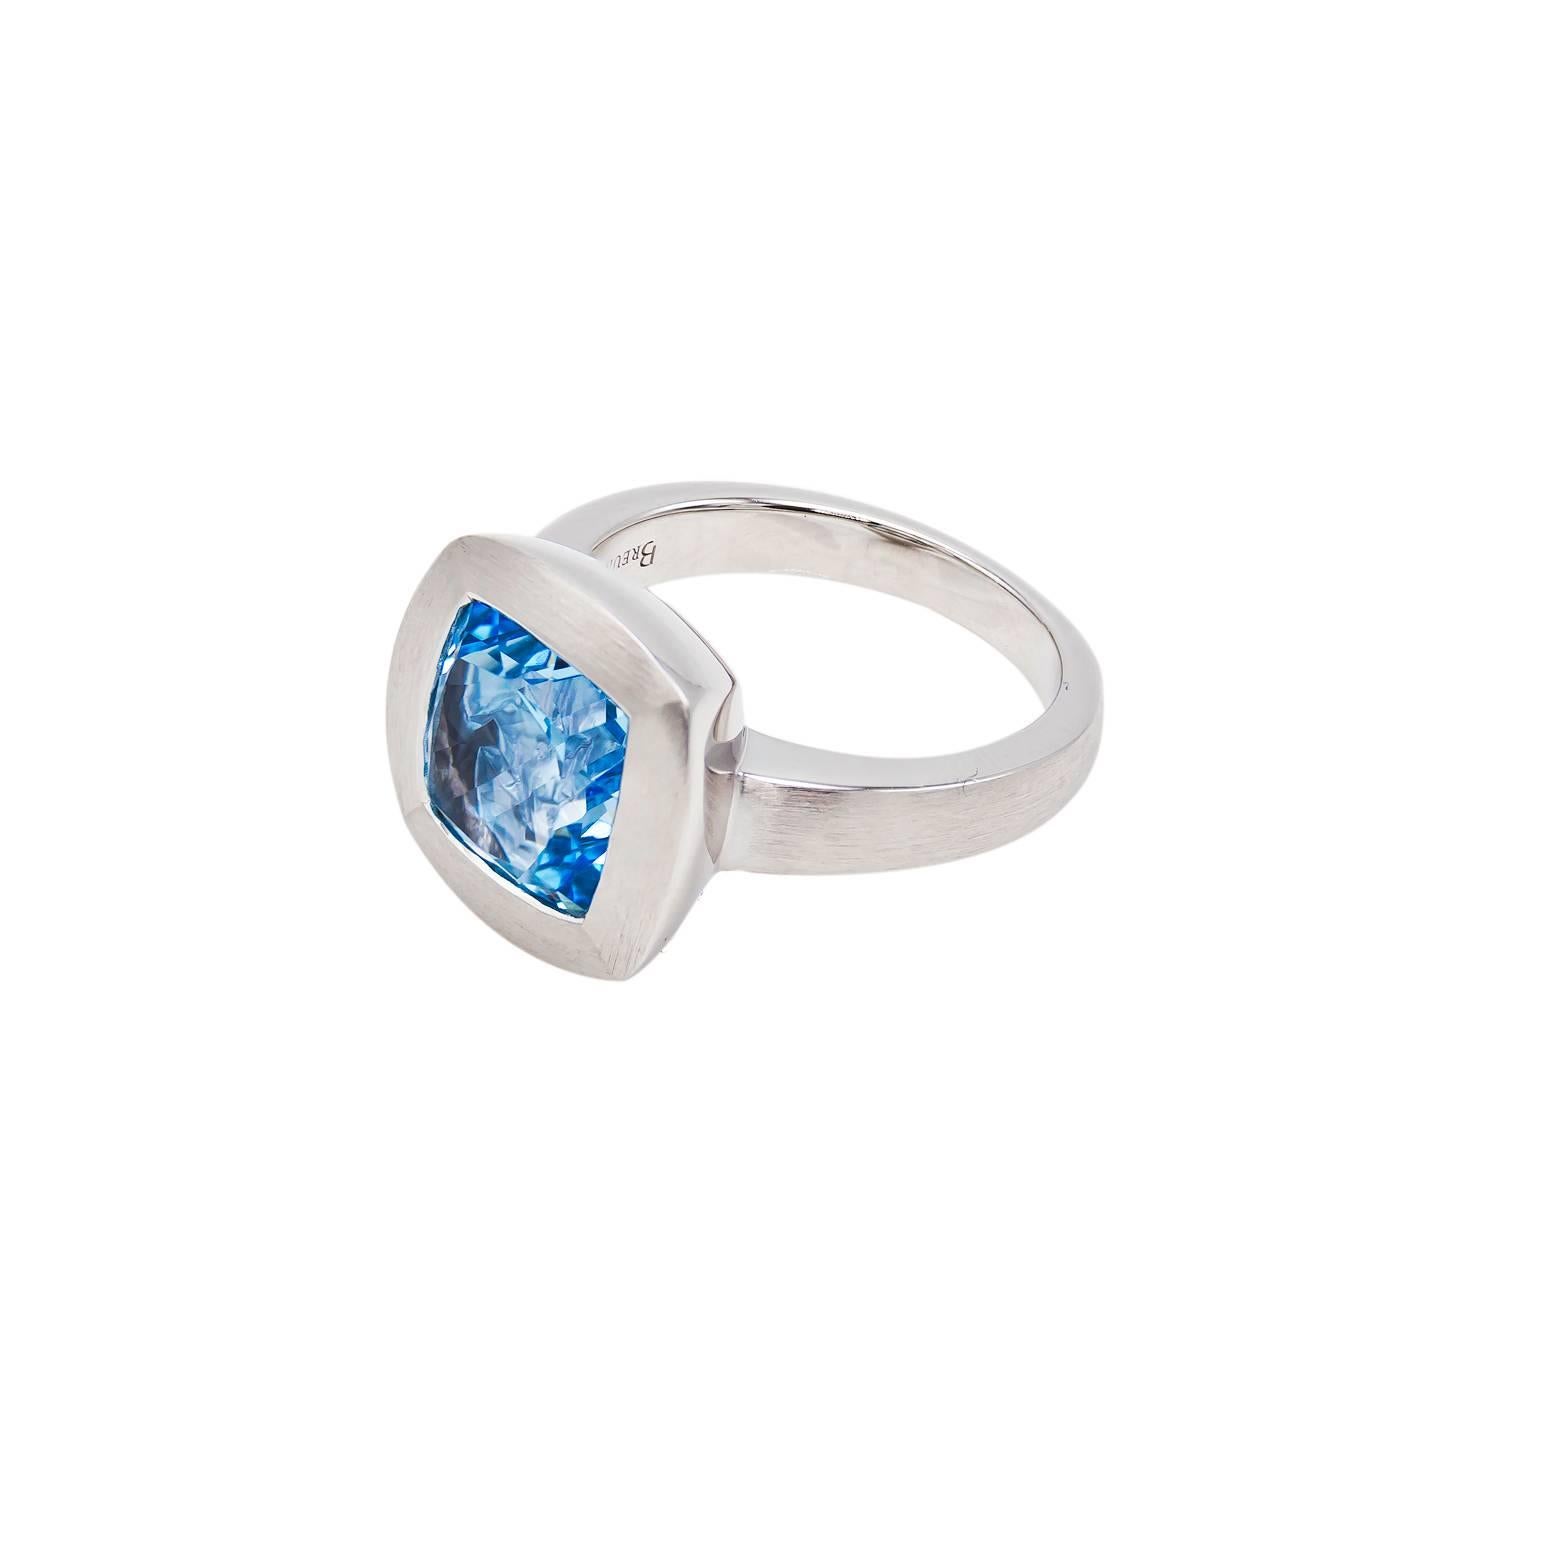 Women's Large Square Blue Topaz Ring set in Sterling Silver with a Matte Finish